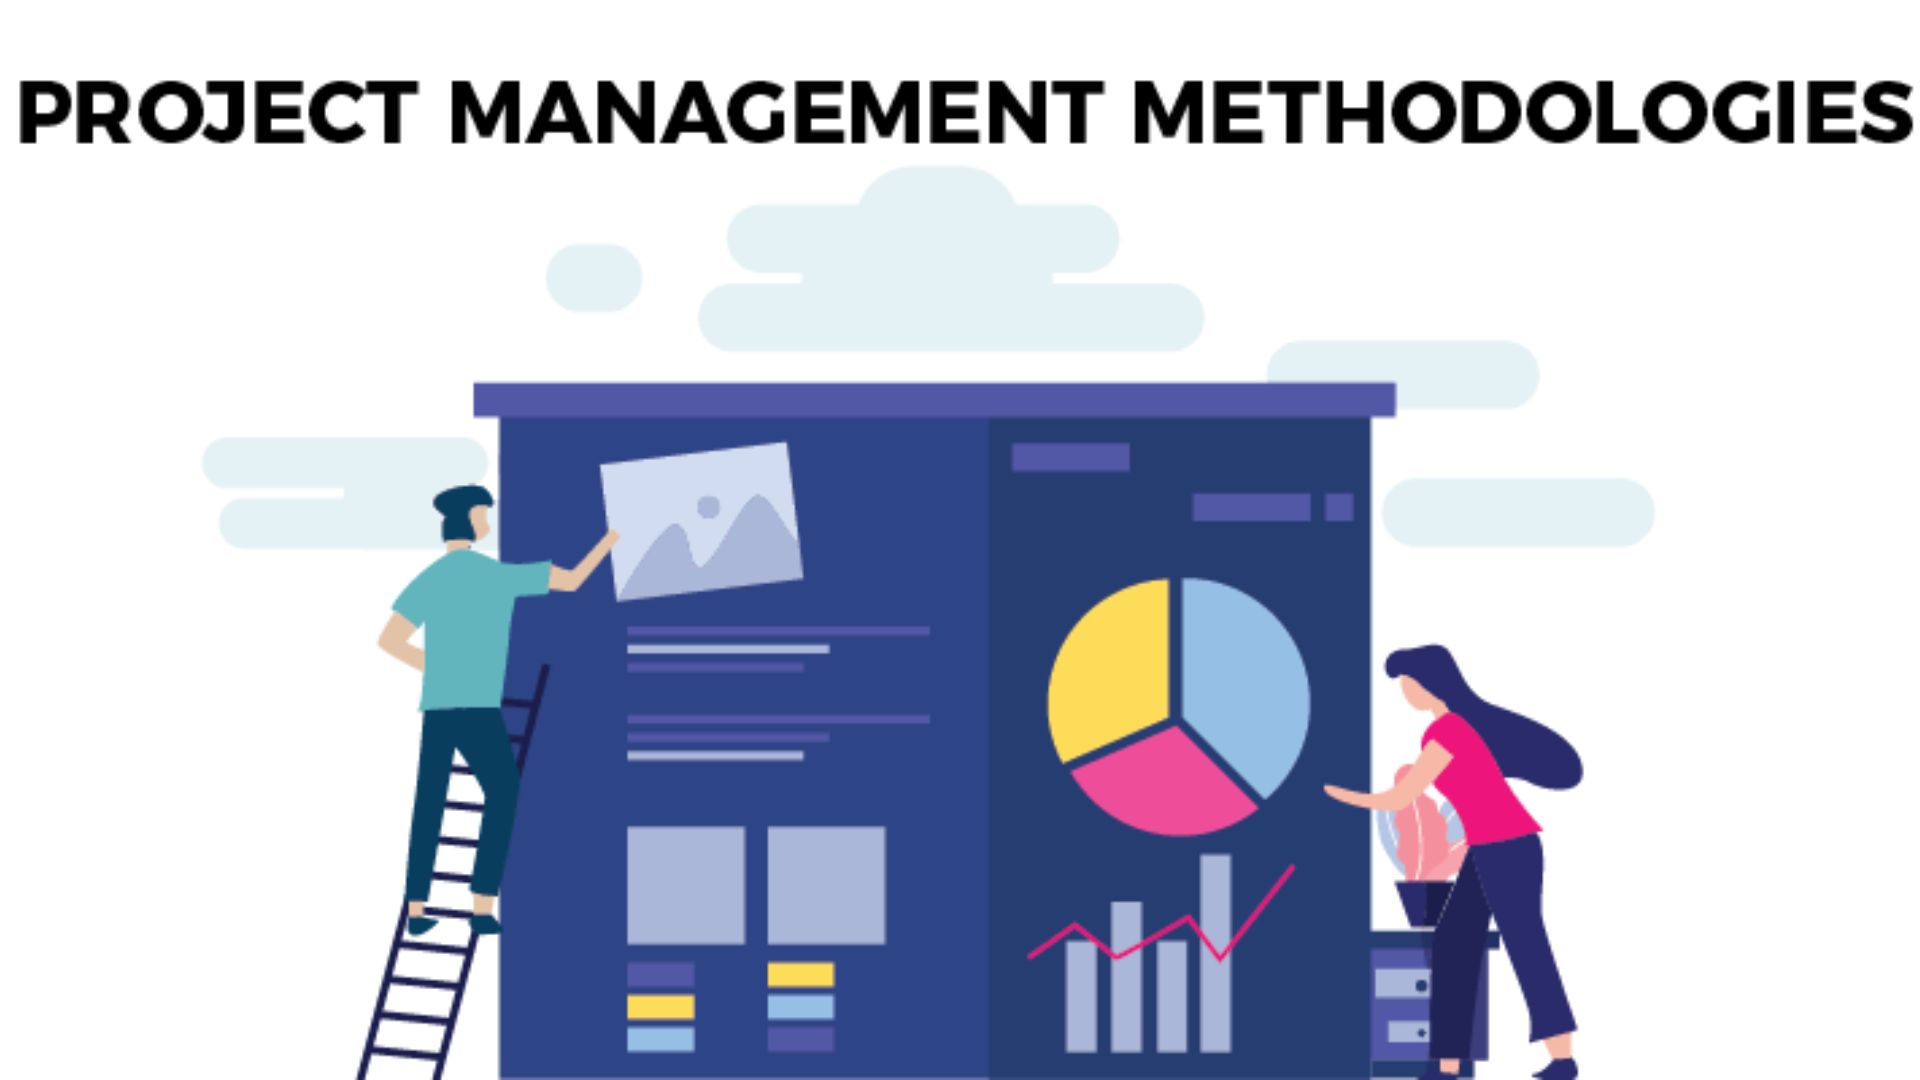 Prominent Project Management Methodologies